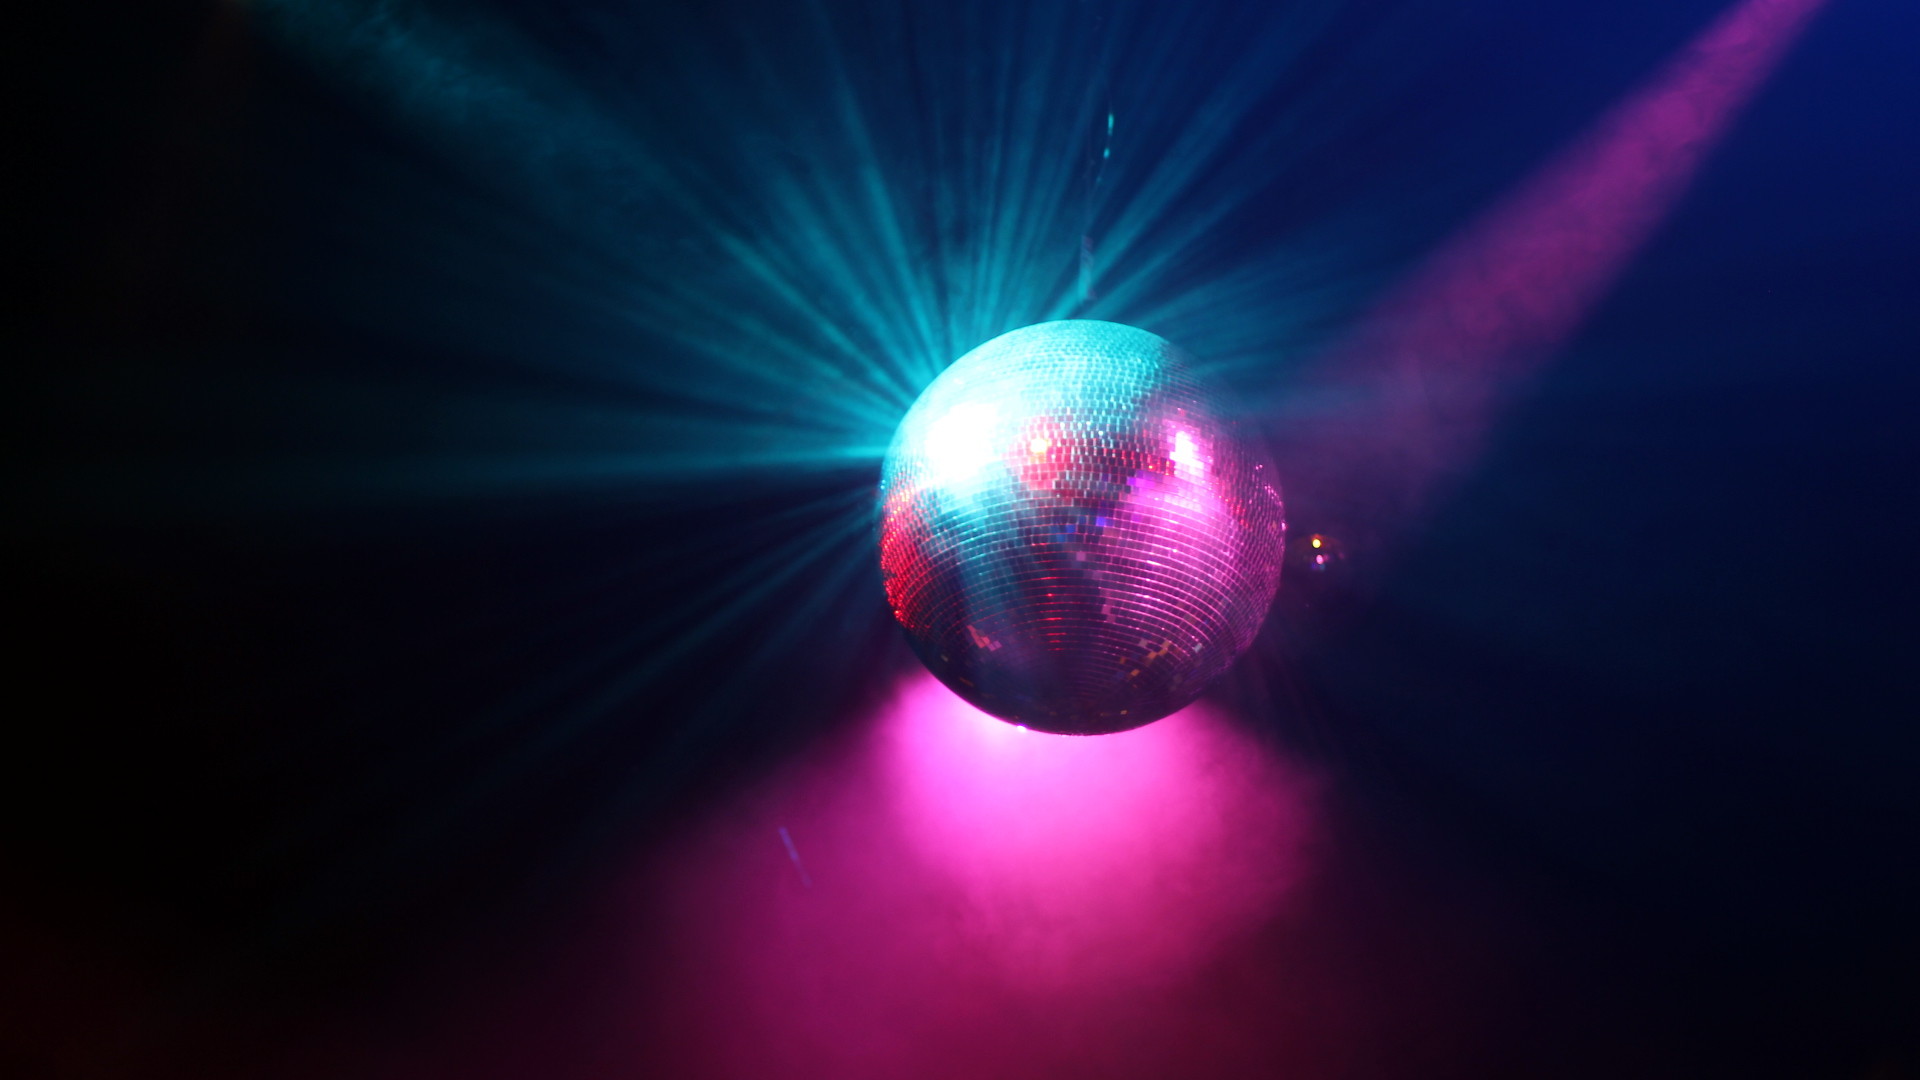 Disco Ball Wallpaper 56 Images HD Wallpapers Download Free Images Wallpaper [wallpaper981.blogspot.com]